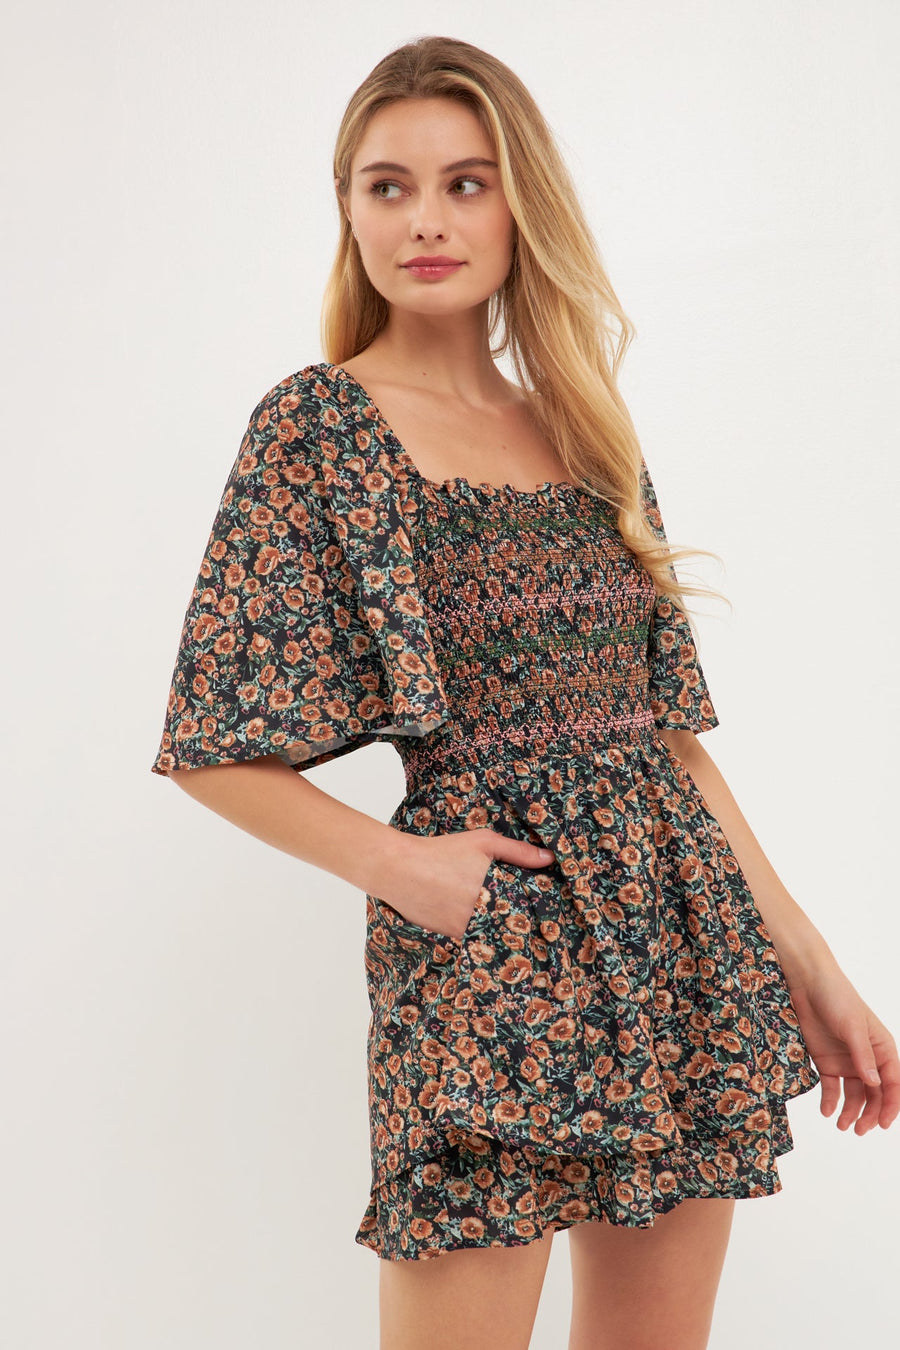 FREE THE ROSES-Smocked Detail Romper-ROMPERS available at Objectrare